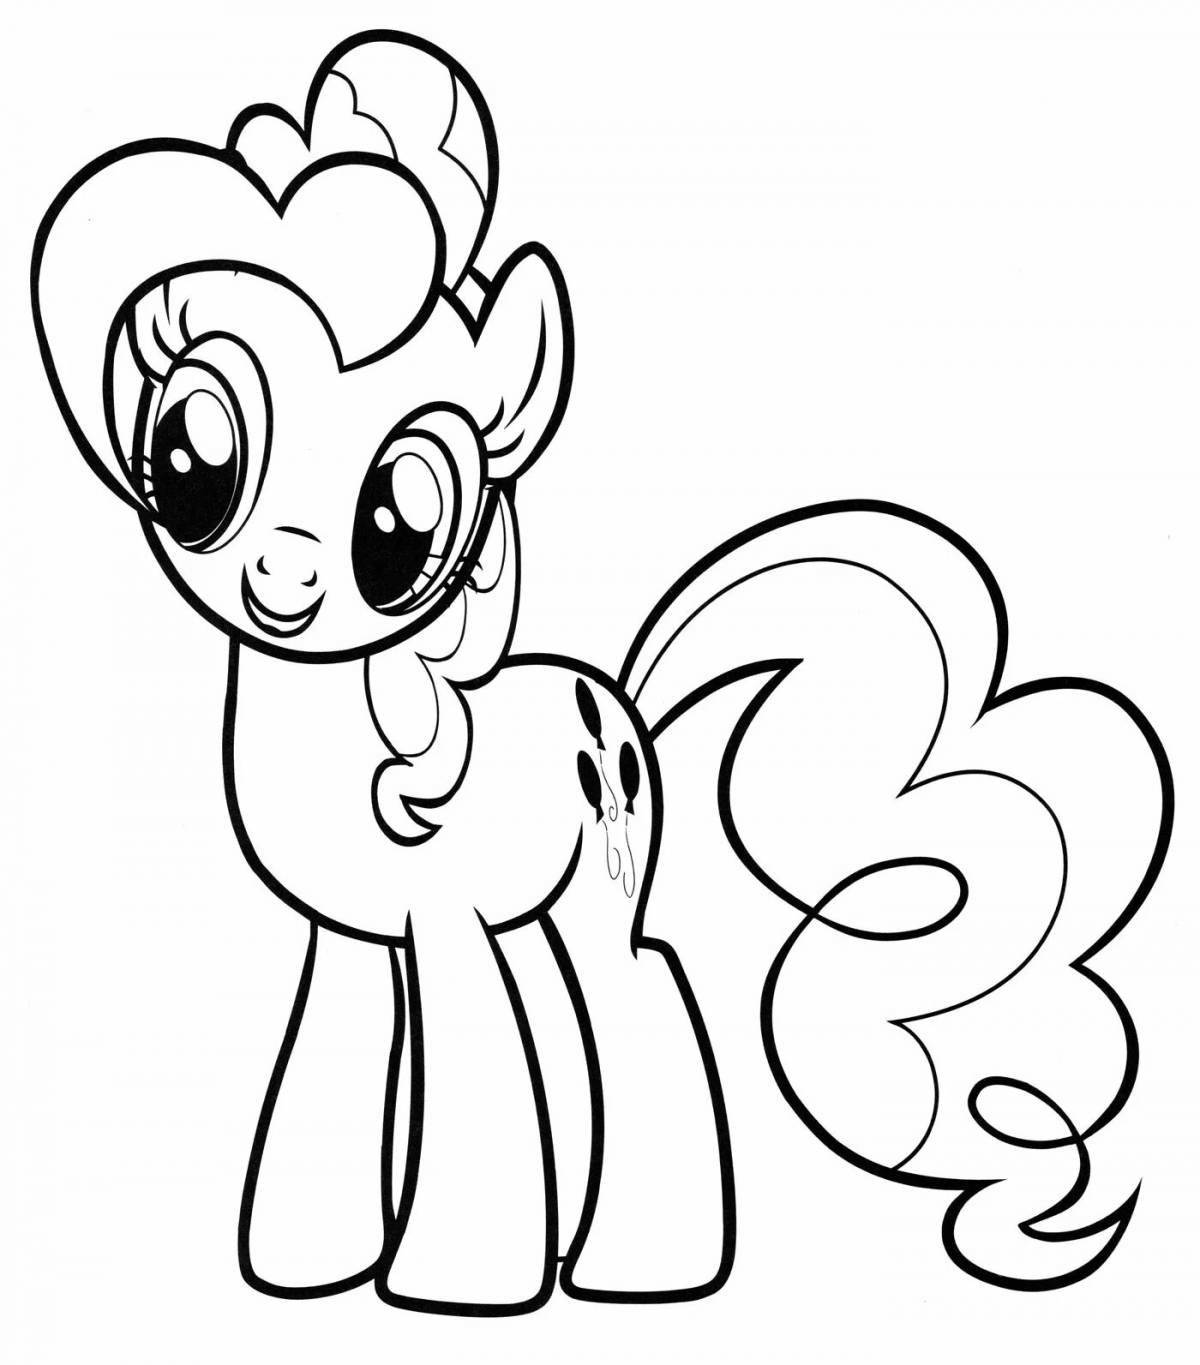 Pinkie Pie radiant coloring page for girls